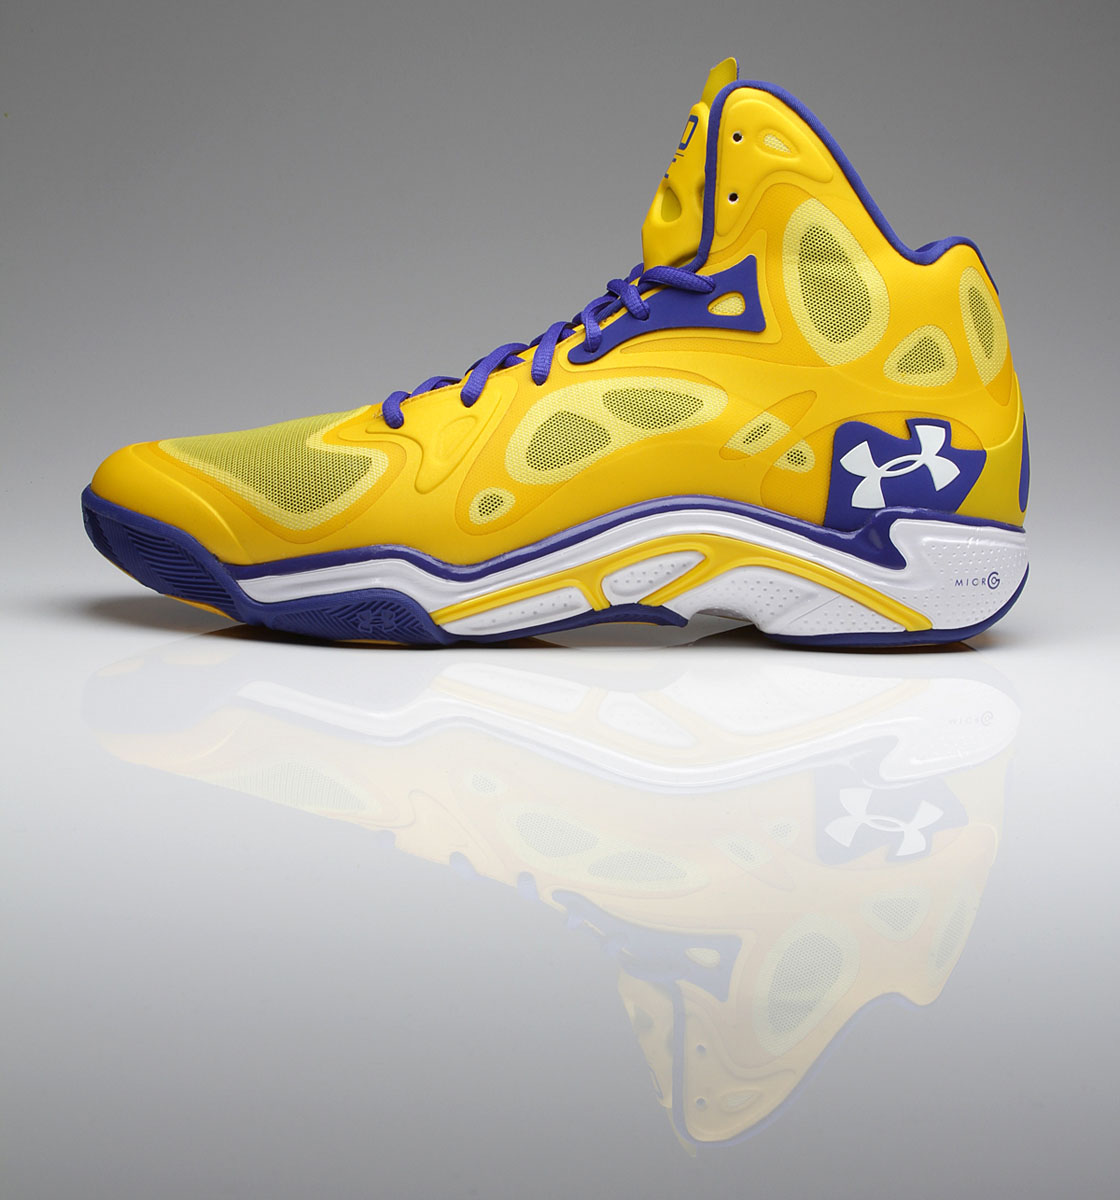 Stephen Curry Under Armour Anatomix Spawn Away PE // Close-Up (1)